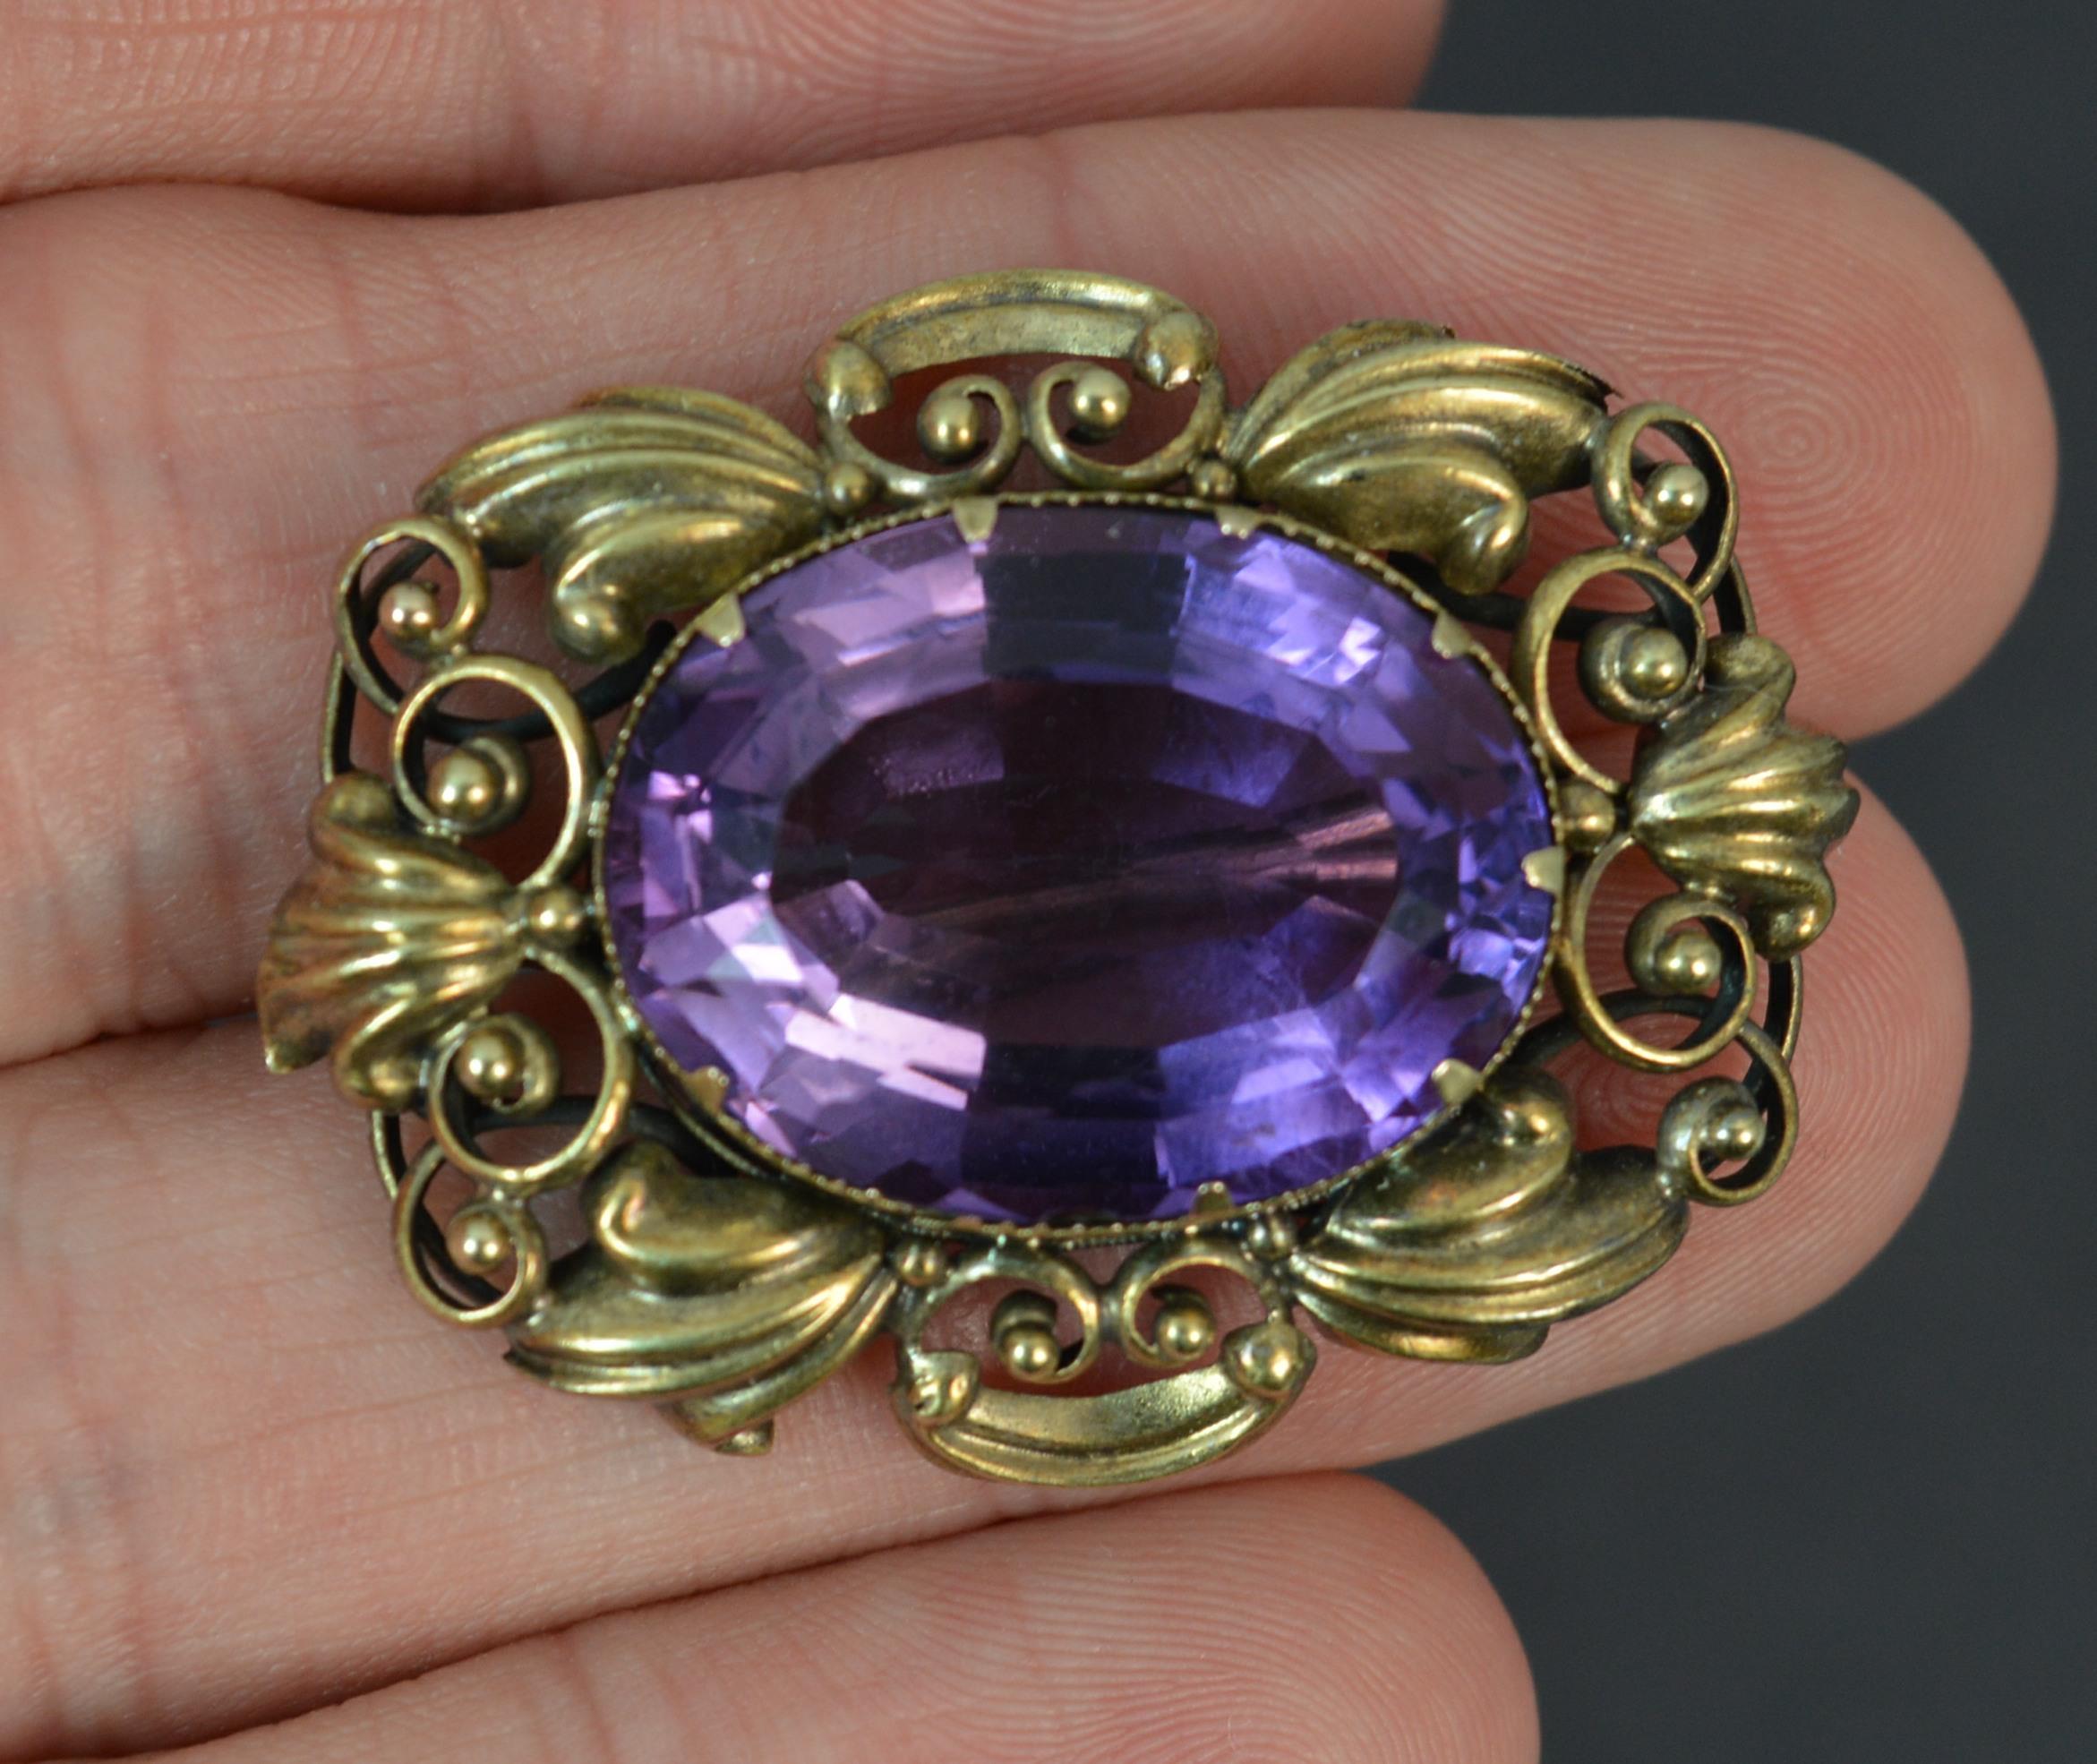 A stunning early Victorian period statement brooch.
Solid 15 carat yellow gold border.
Designed with an oval cut amethyst to the centre. Wonderful colour.

CONDITION ; Very good for age. Clean amethyst, issue free. Crisp gold design. Working pin.